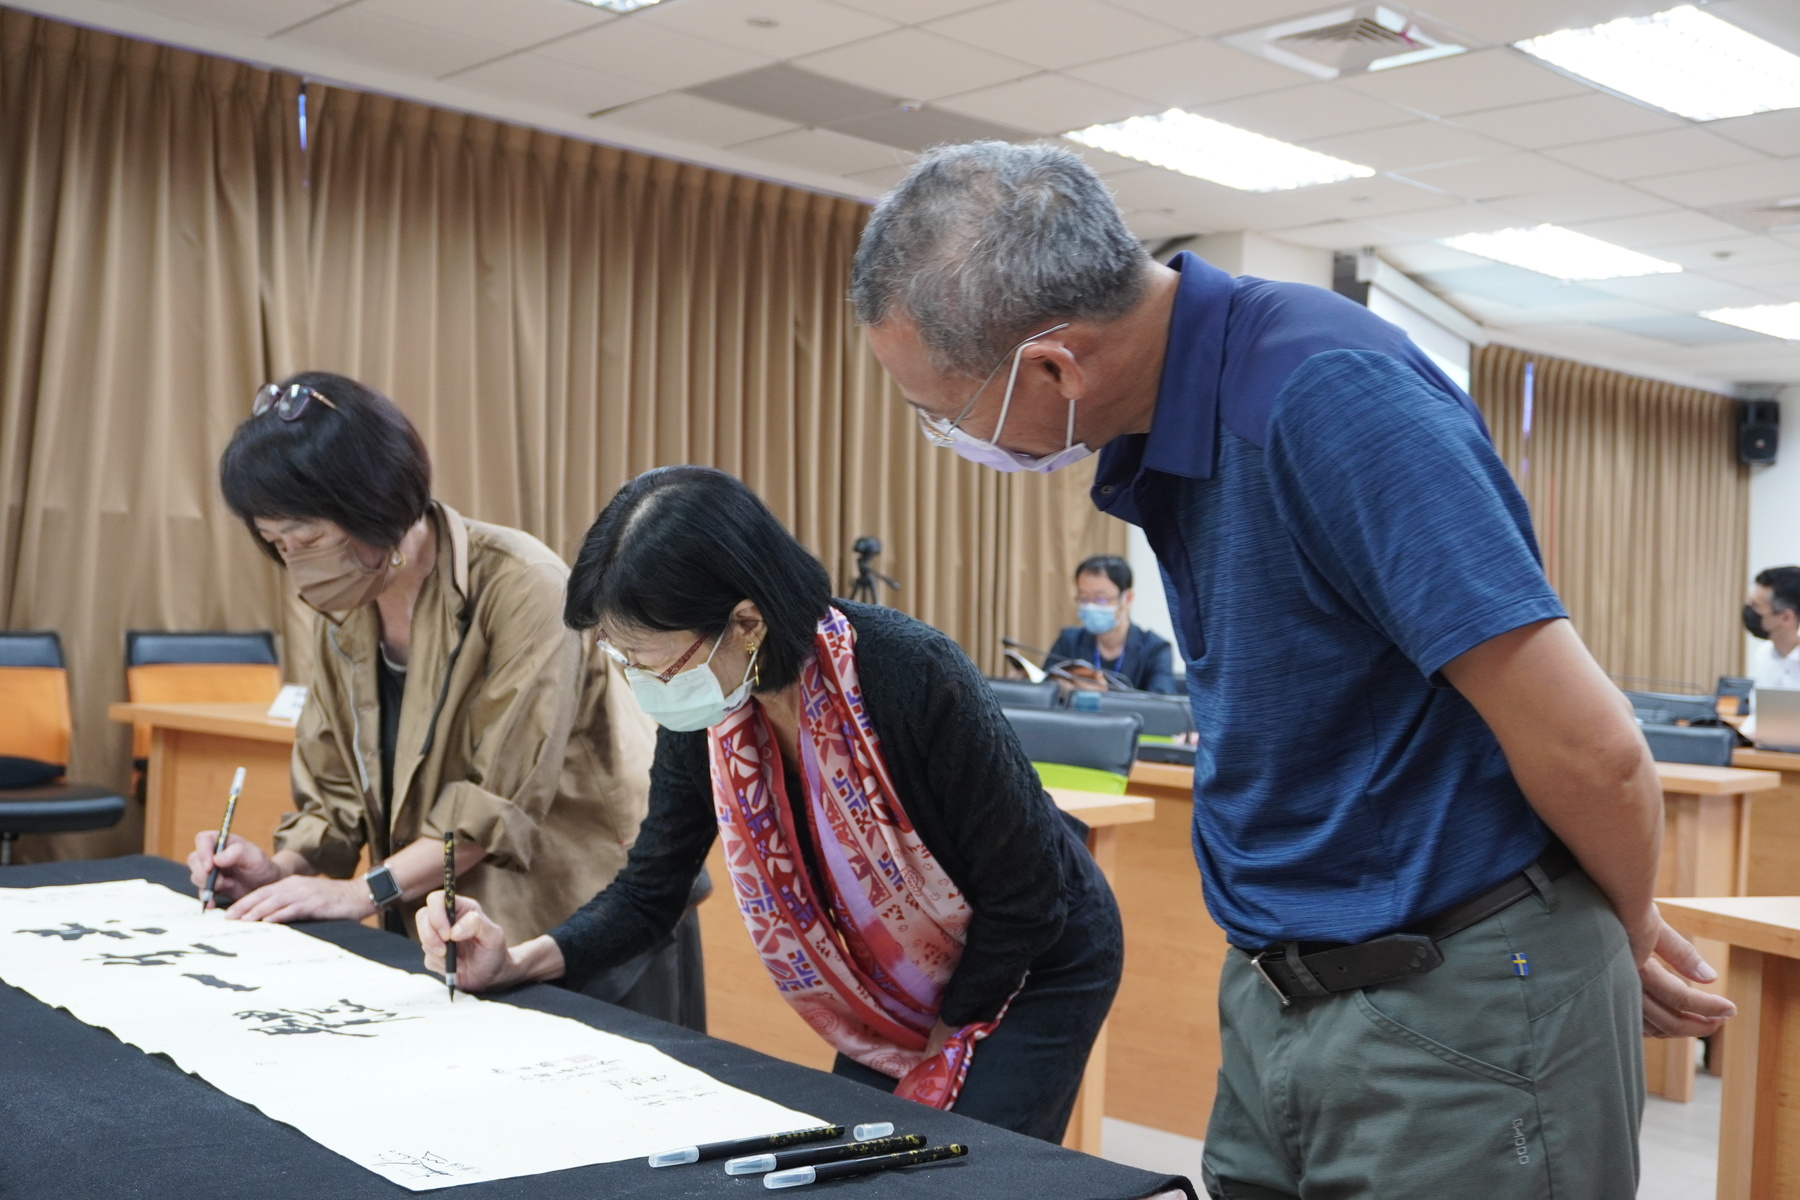 Participants left signatures for the ceremony. Left to right: Joyce Chi-hui Liu, Hsiao-yen Peng, Hsi-San Lai